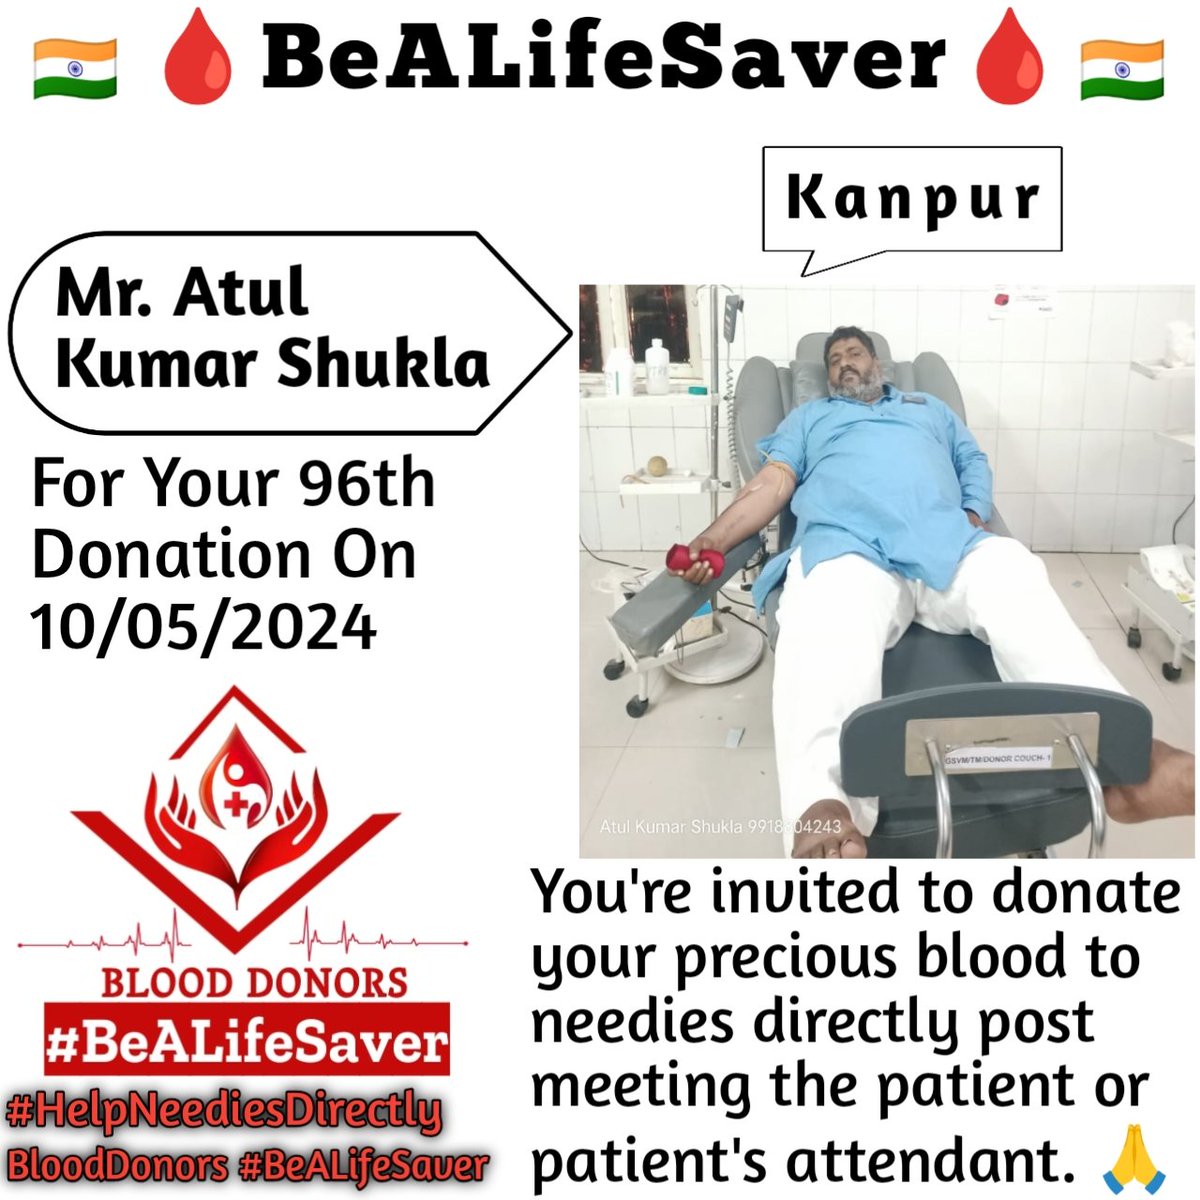 Kanpur BeALifeSaver
Kudos_Mr_Atul_Kumar_Shukla_Ji

Today's hero
Mr. Atul_Kumar_Shukla Ji donated blood in Kanpur for the 96th Time for one of the needies. Heartfelt Gratitude and Respect to Atul Kumar Shukla Ji for his blood donation for Patient admitted in Kanpur.